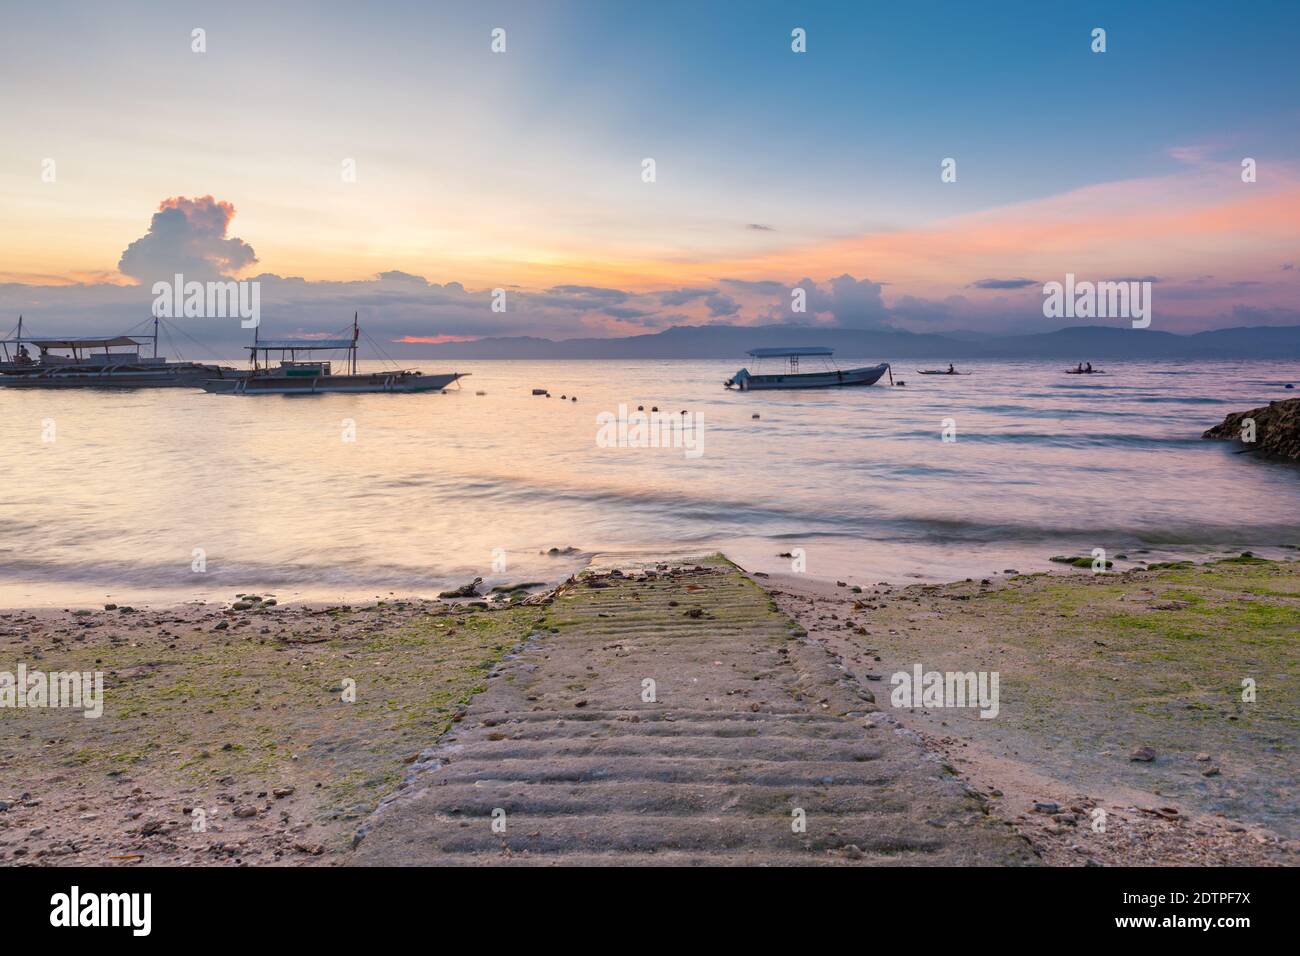 Sunset view of the Moalboal beach famous diving and snorkeling spot in Cebu with Negros island on the background, Philippines Stock Photo